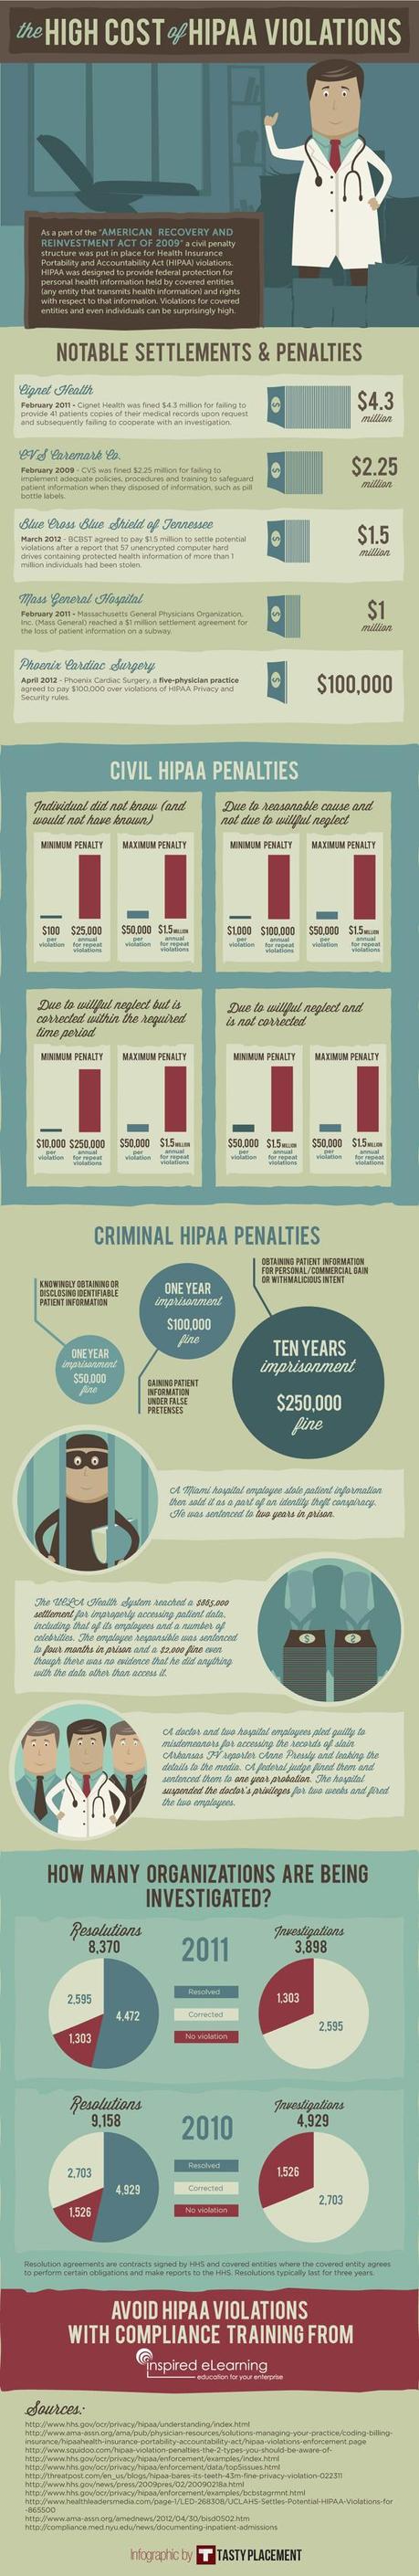 The High Costs of HIPAA Violations Infographic